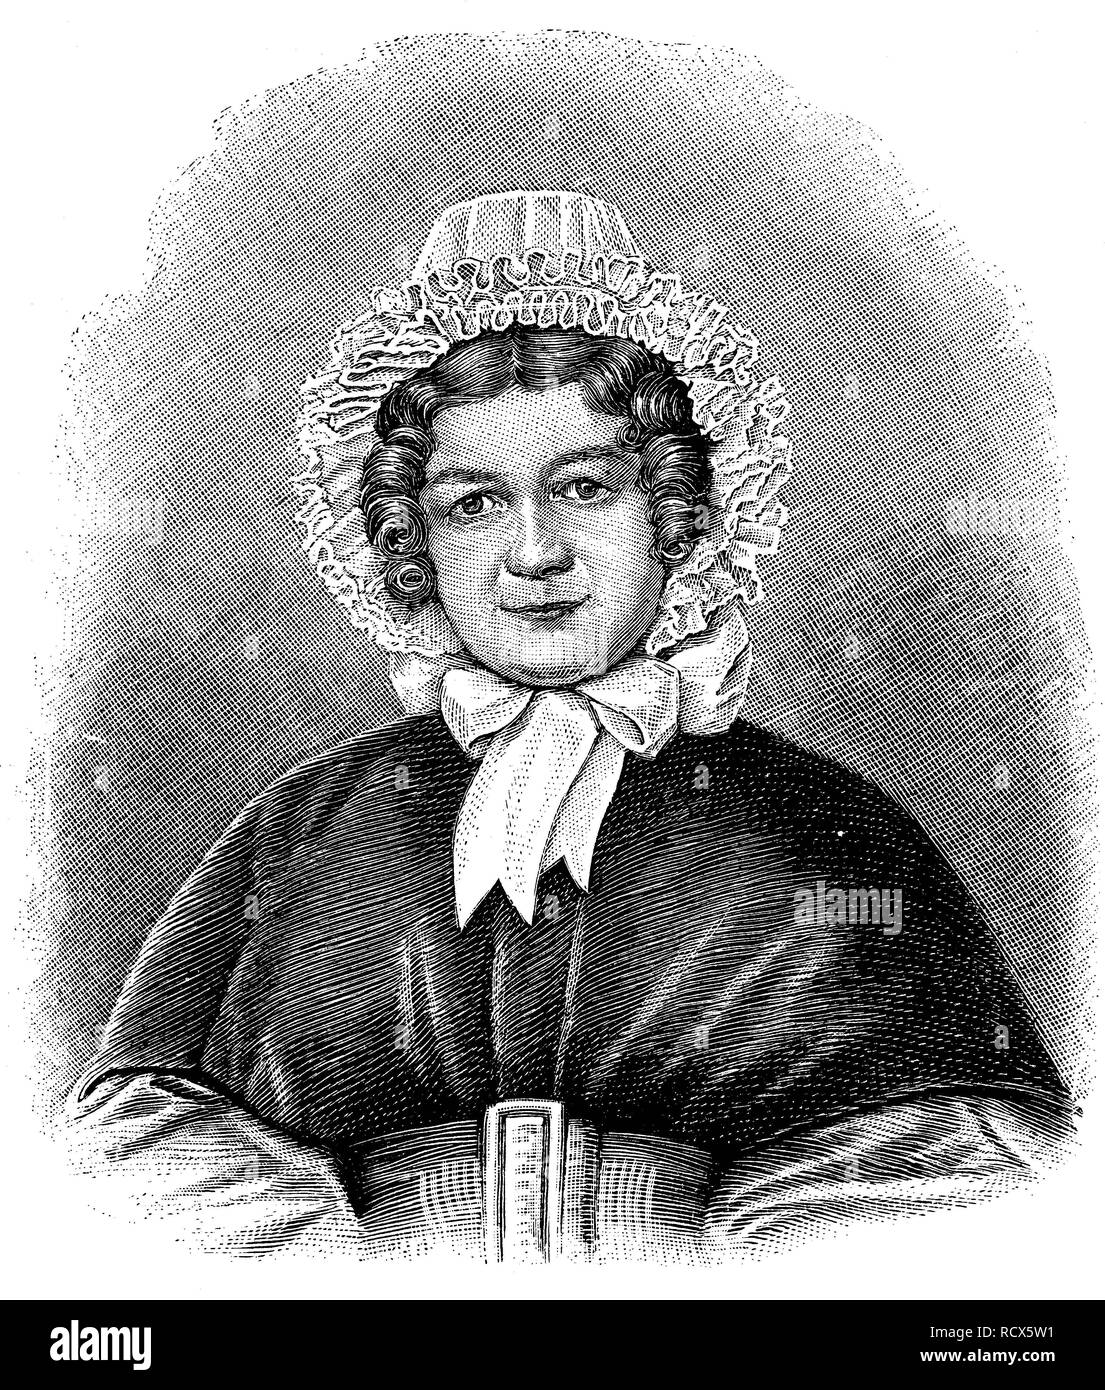 Marianne von Willemer, 1784-1860, actress and dancer from Austria, pictured in 1836, woodcut, 1888, historic engraving Stock Photo